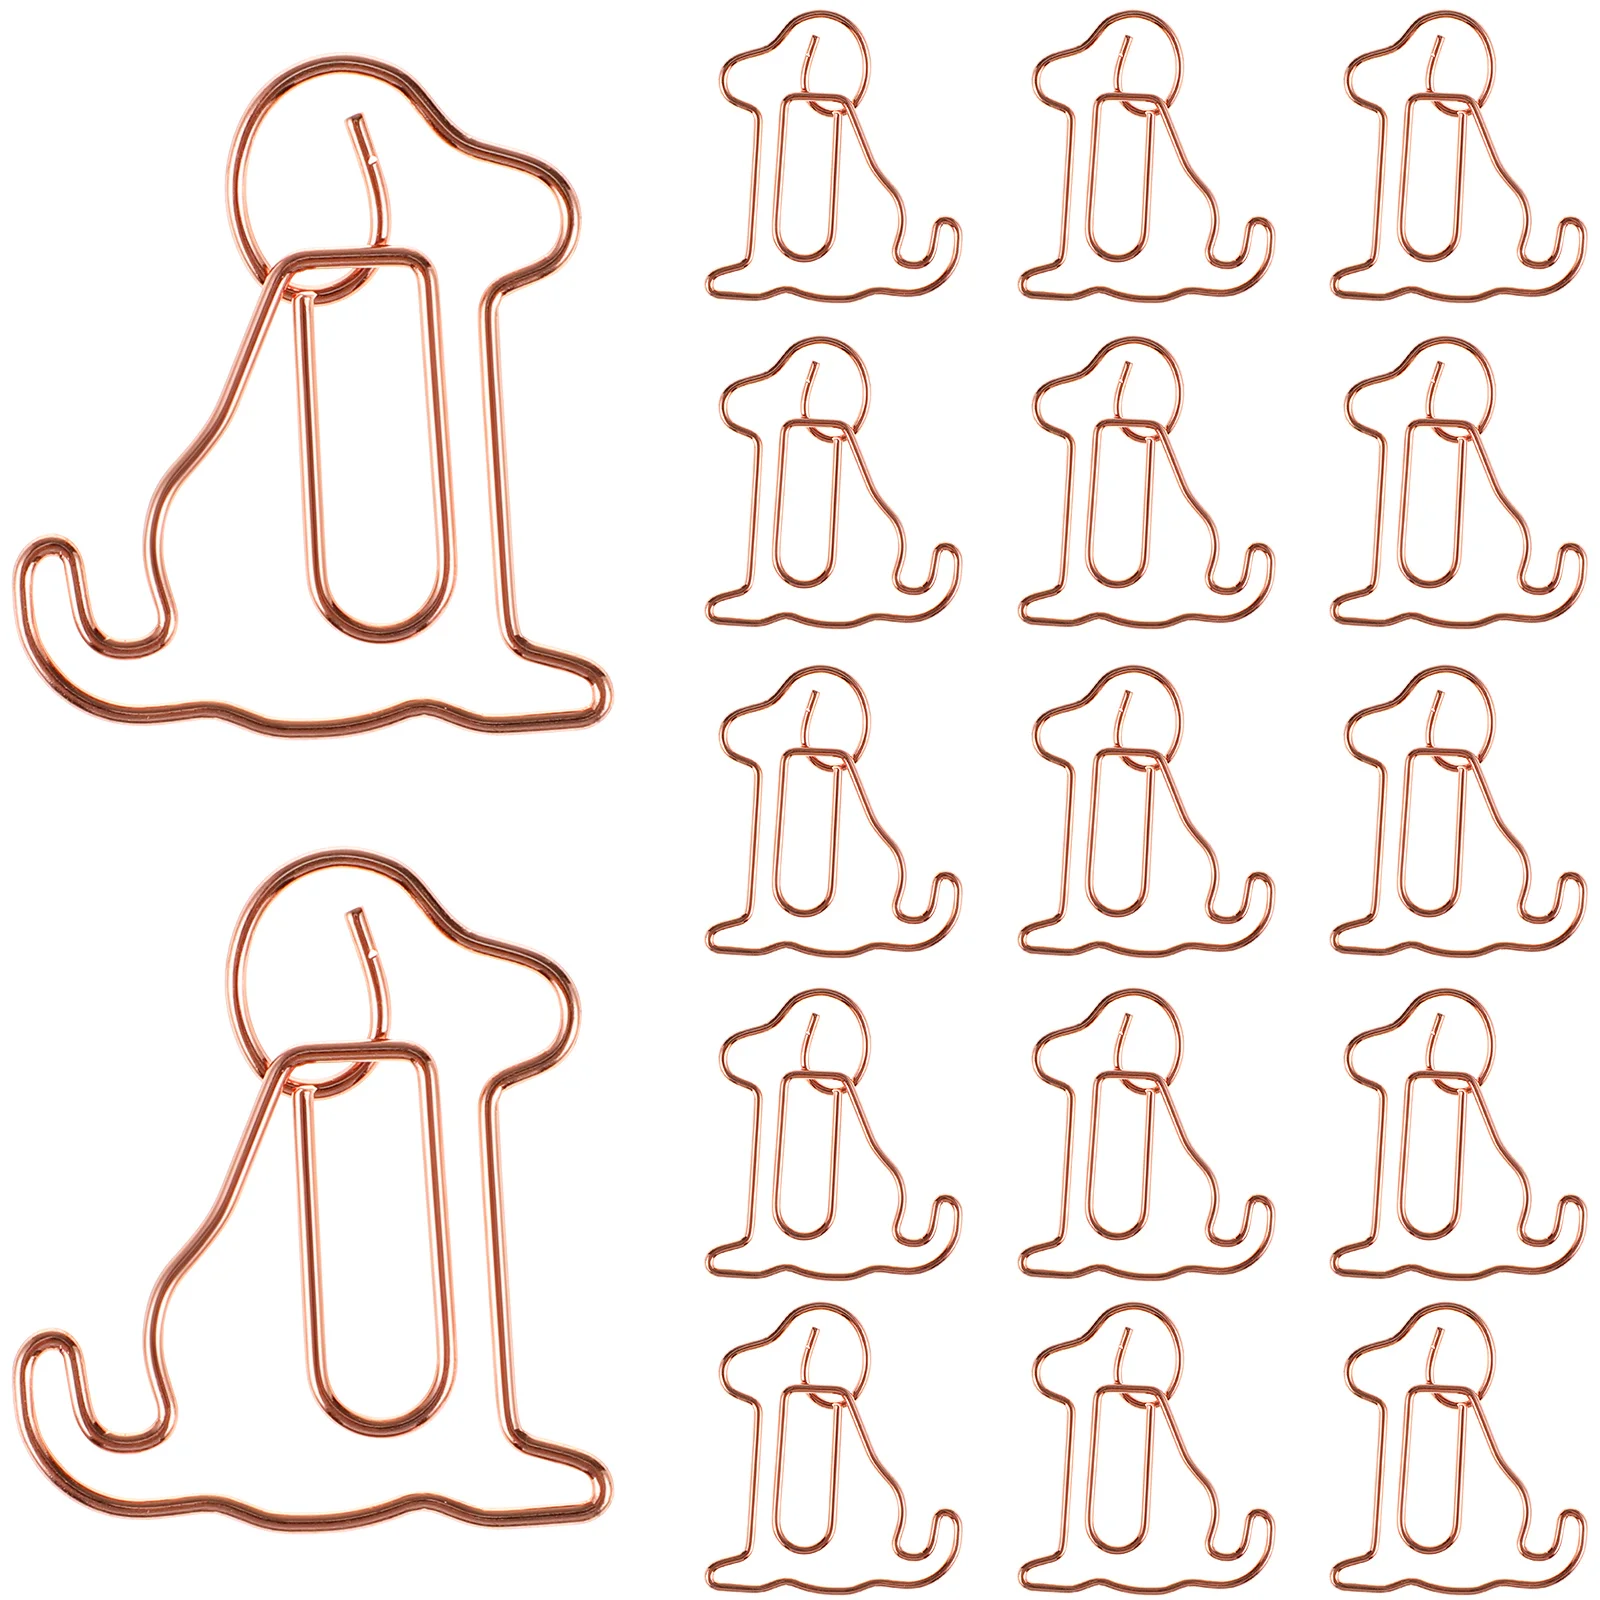 

Metal Lovely Decorative Creative Paperclips Dog Shaped Document Clips Ticket Photo Clips Office Accessories Statioinery